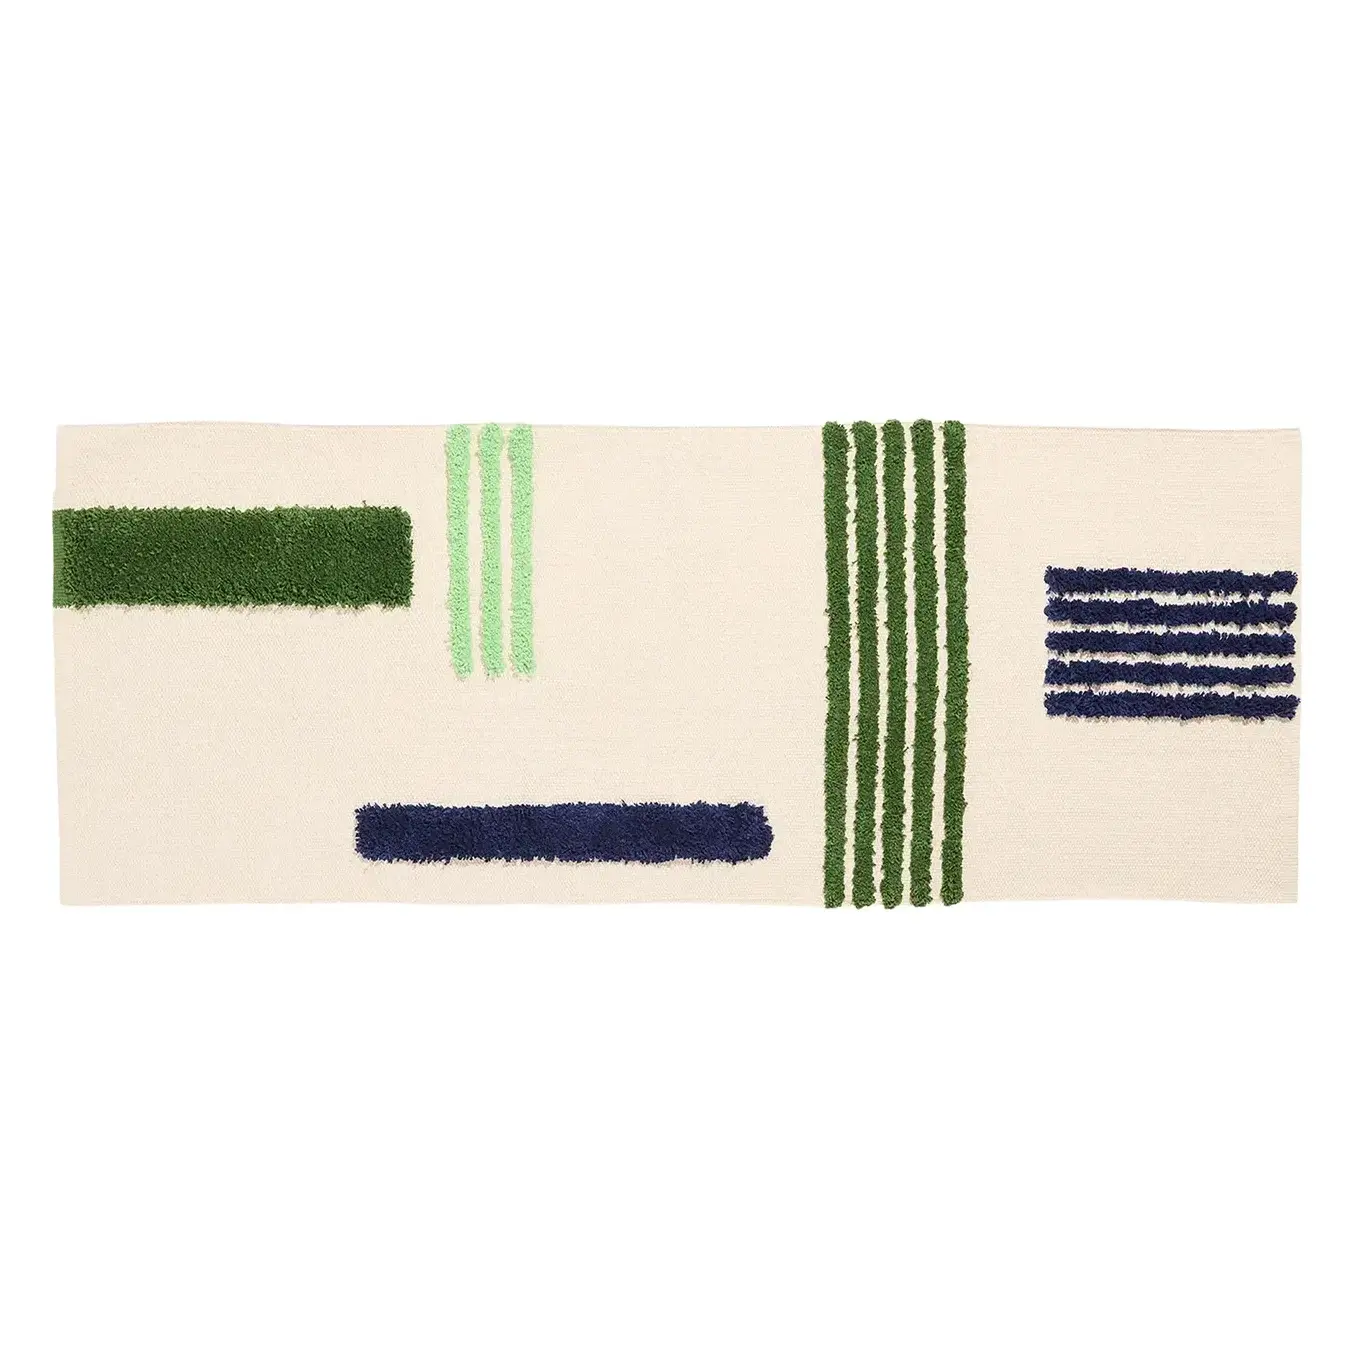 These Rugs Inspired by Ribbons Top Our List of Favorite April Launches